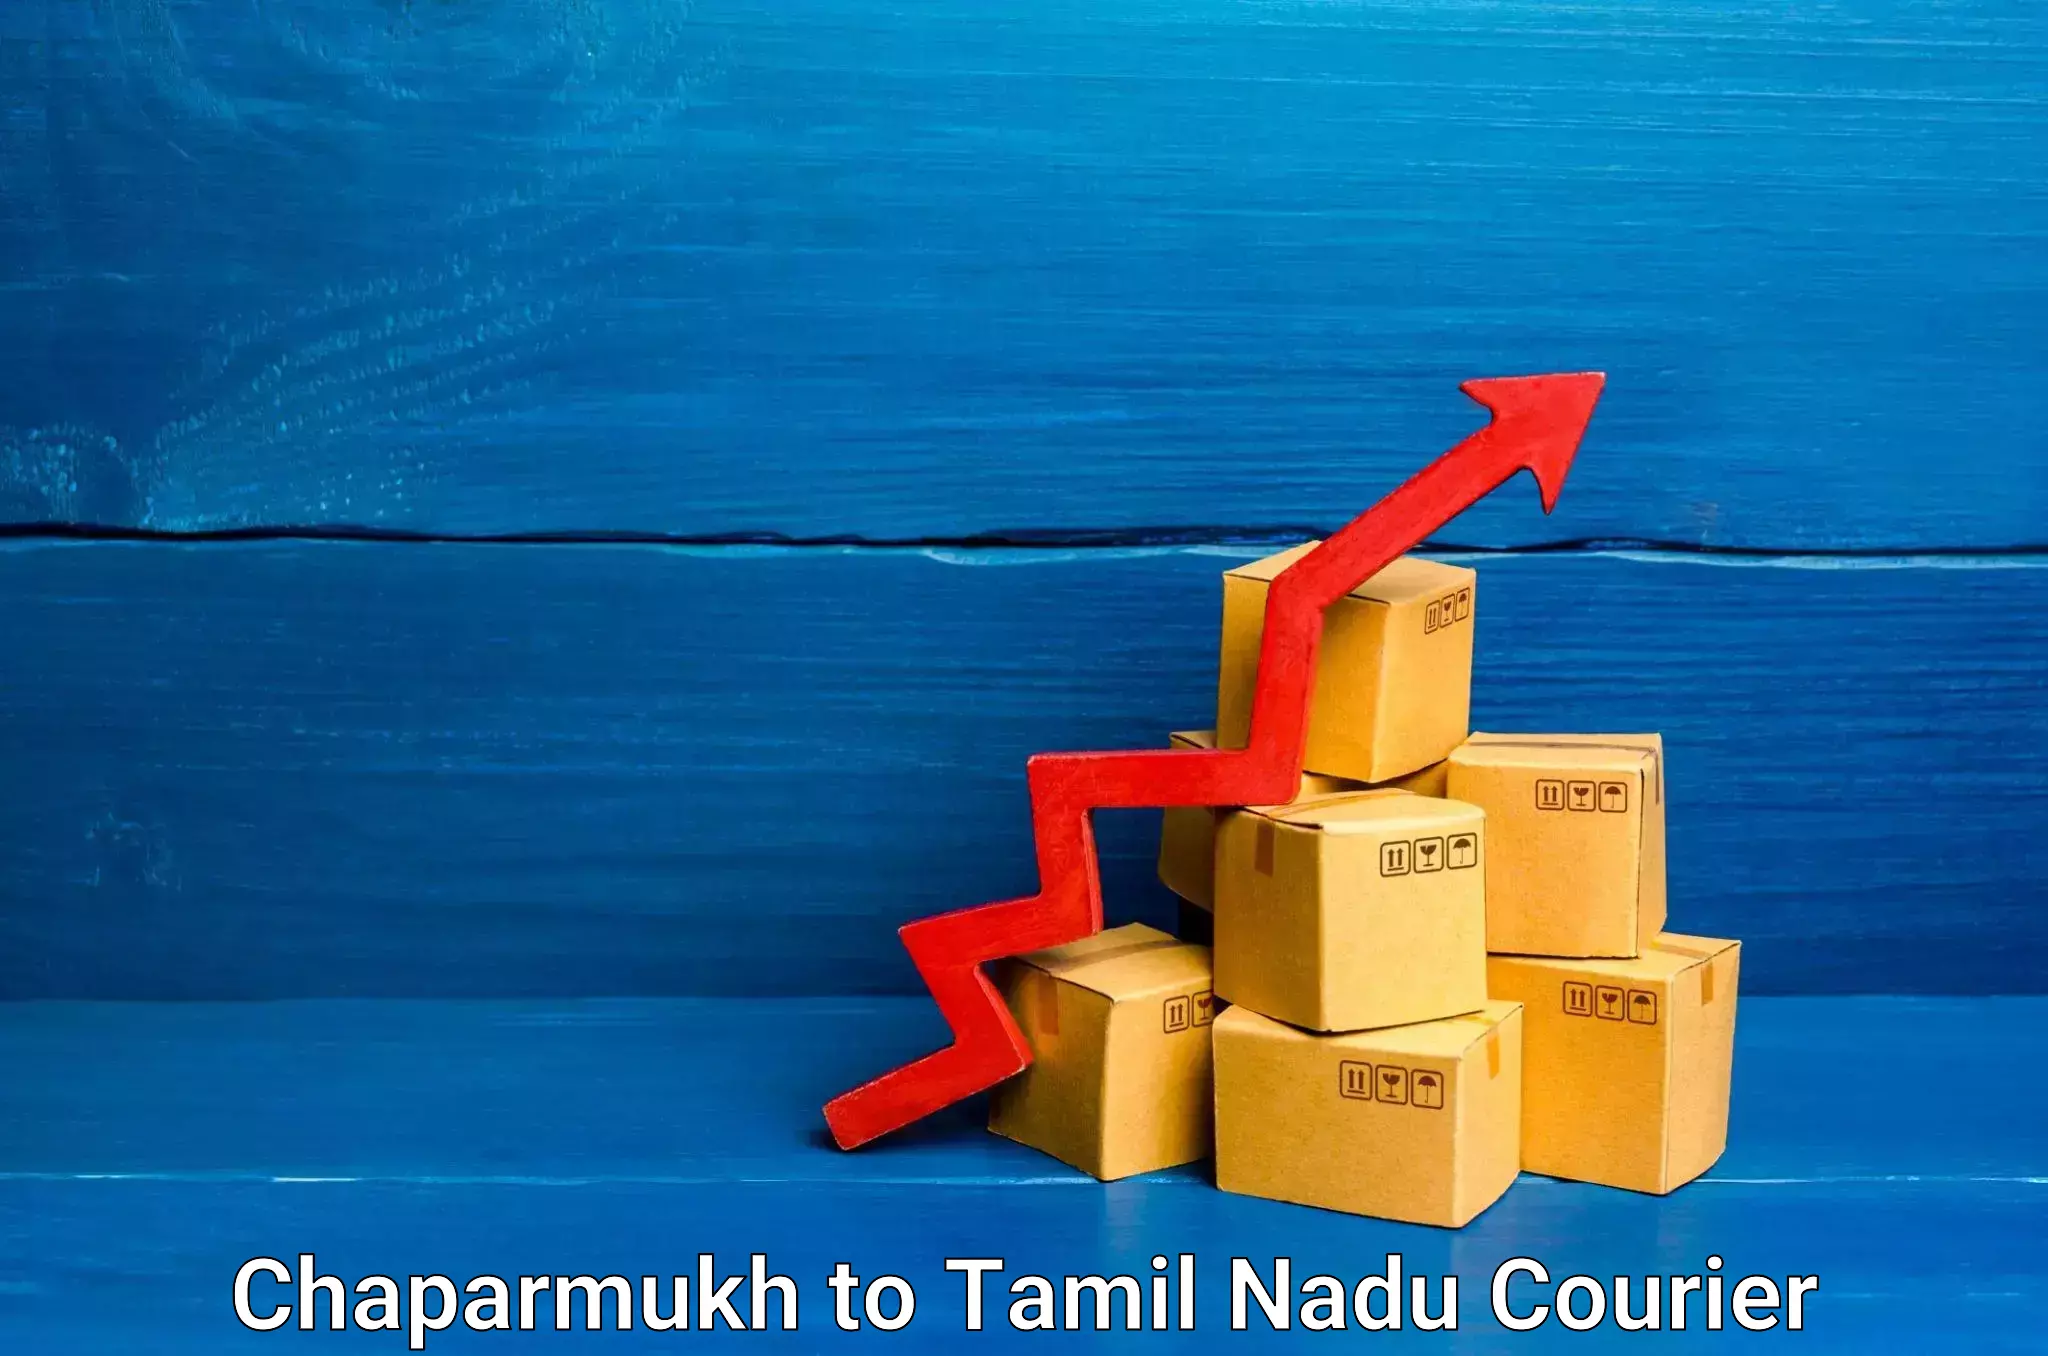 Efficient package consolidation Chaparmukh to Chennai Port